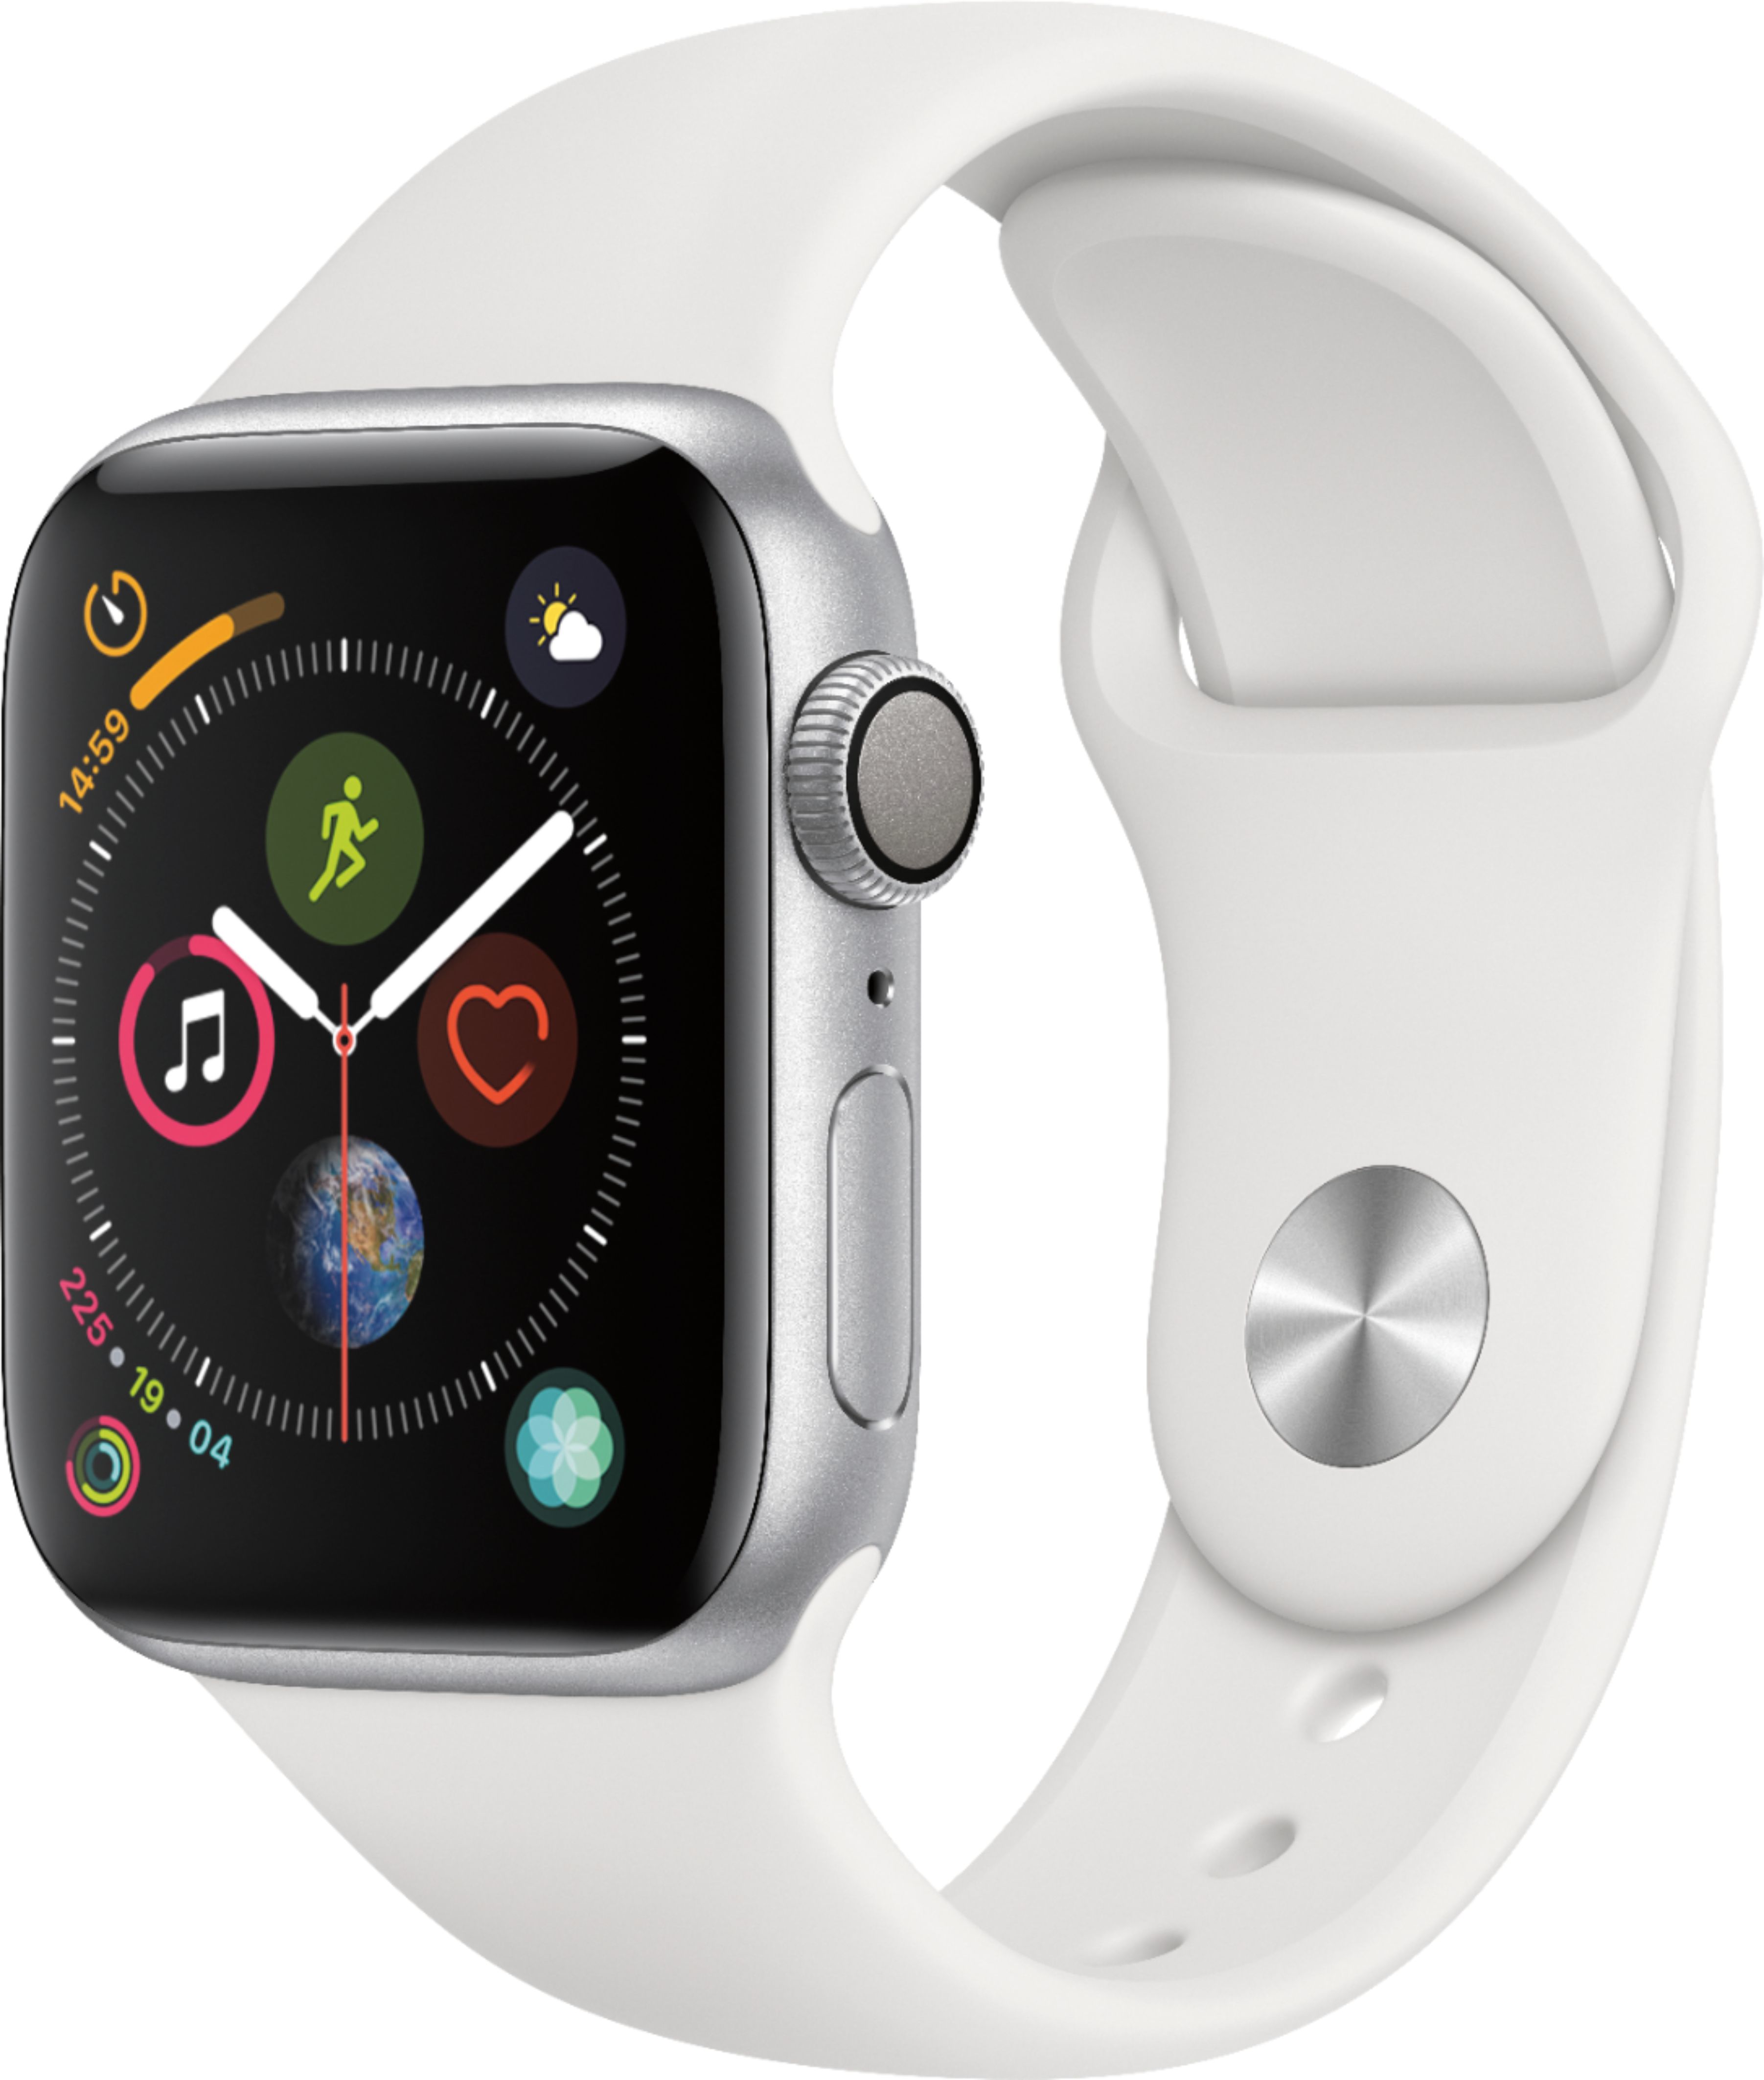 Apple Watch Series 4 (GPS) 40mm Silver Aluminum Case with White Sport Band - Silver Aluminum was $349.0 now $244.99 (30.0% off)